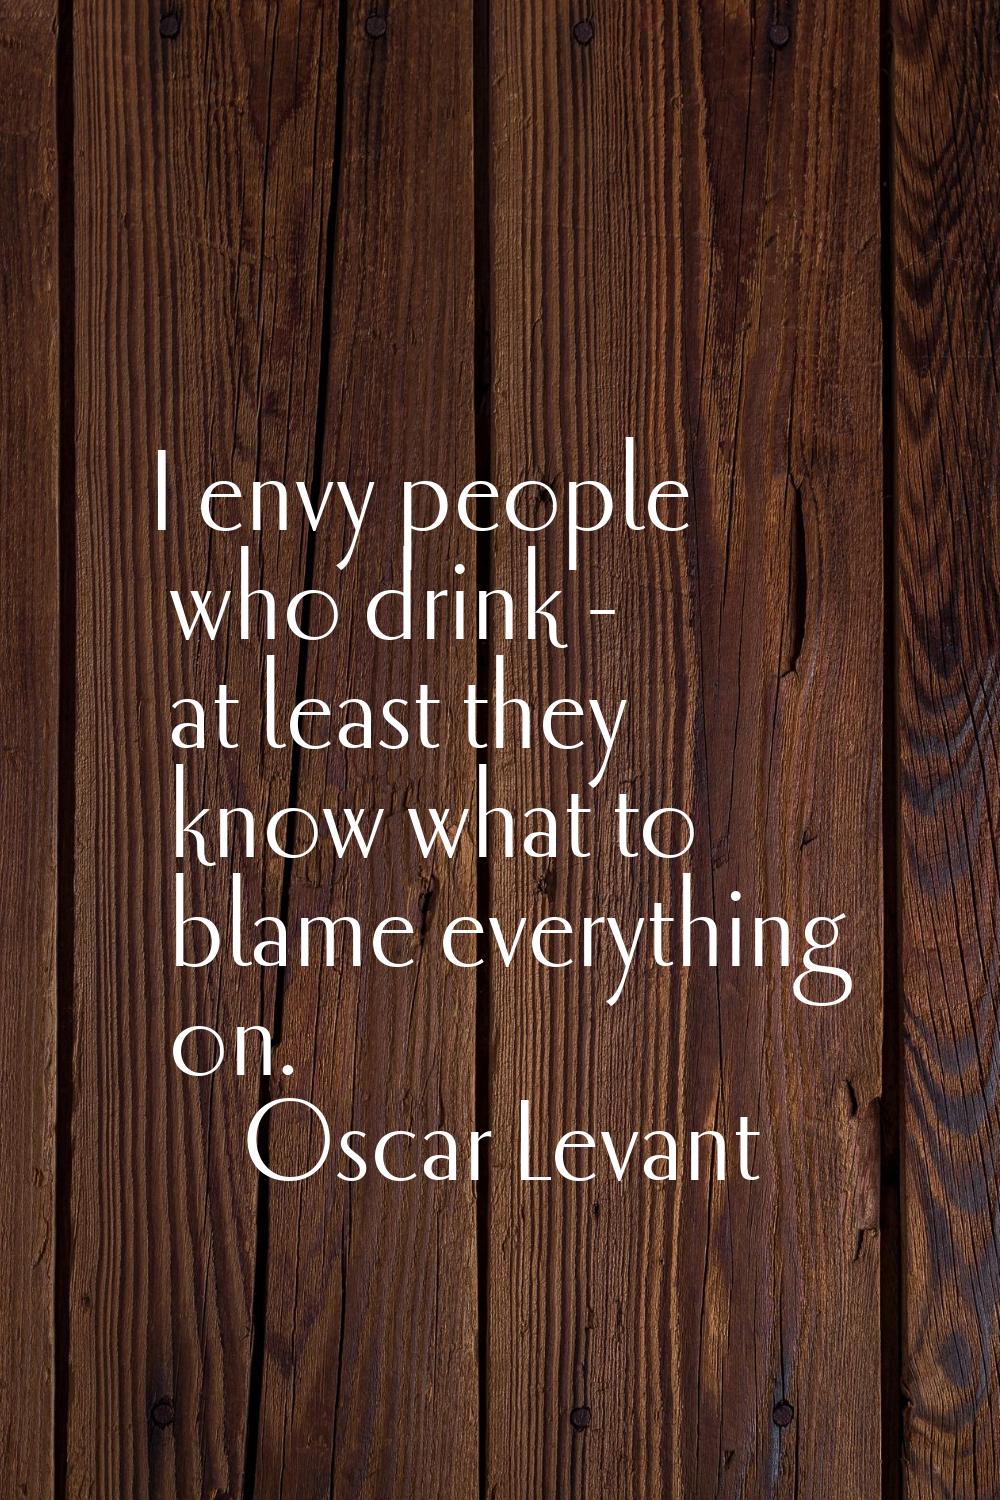 I envy people who drink - at least they know what to blame everything on.